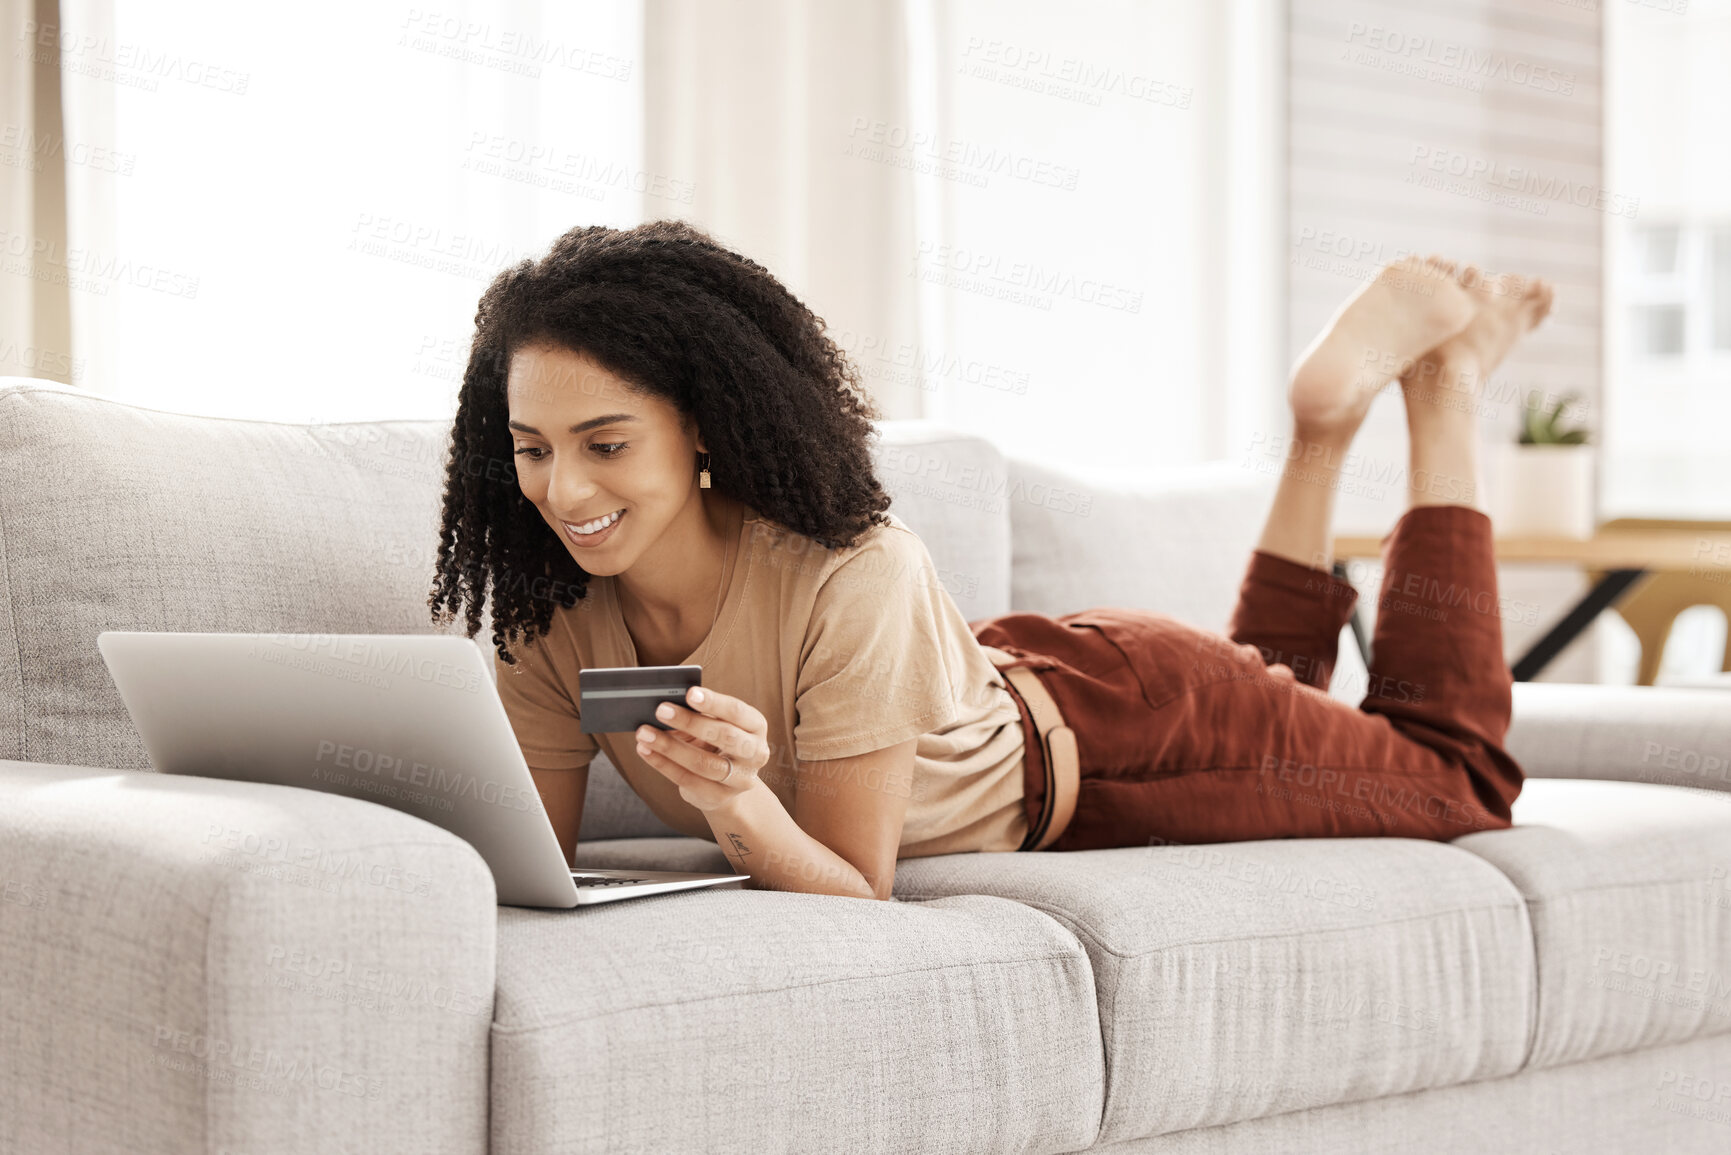 Buy stock photo Laptop, ecommerce and customer with a black woman online shopping using her credit card in the house. Computer, living room and payment with a female consumer using technology to shop on the sofa